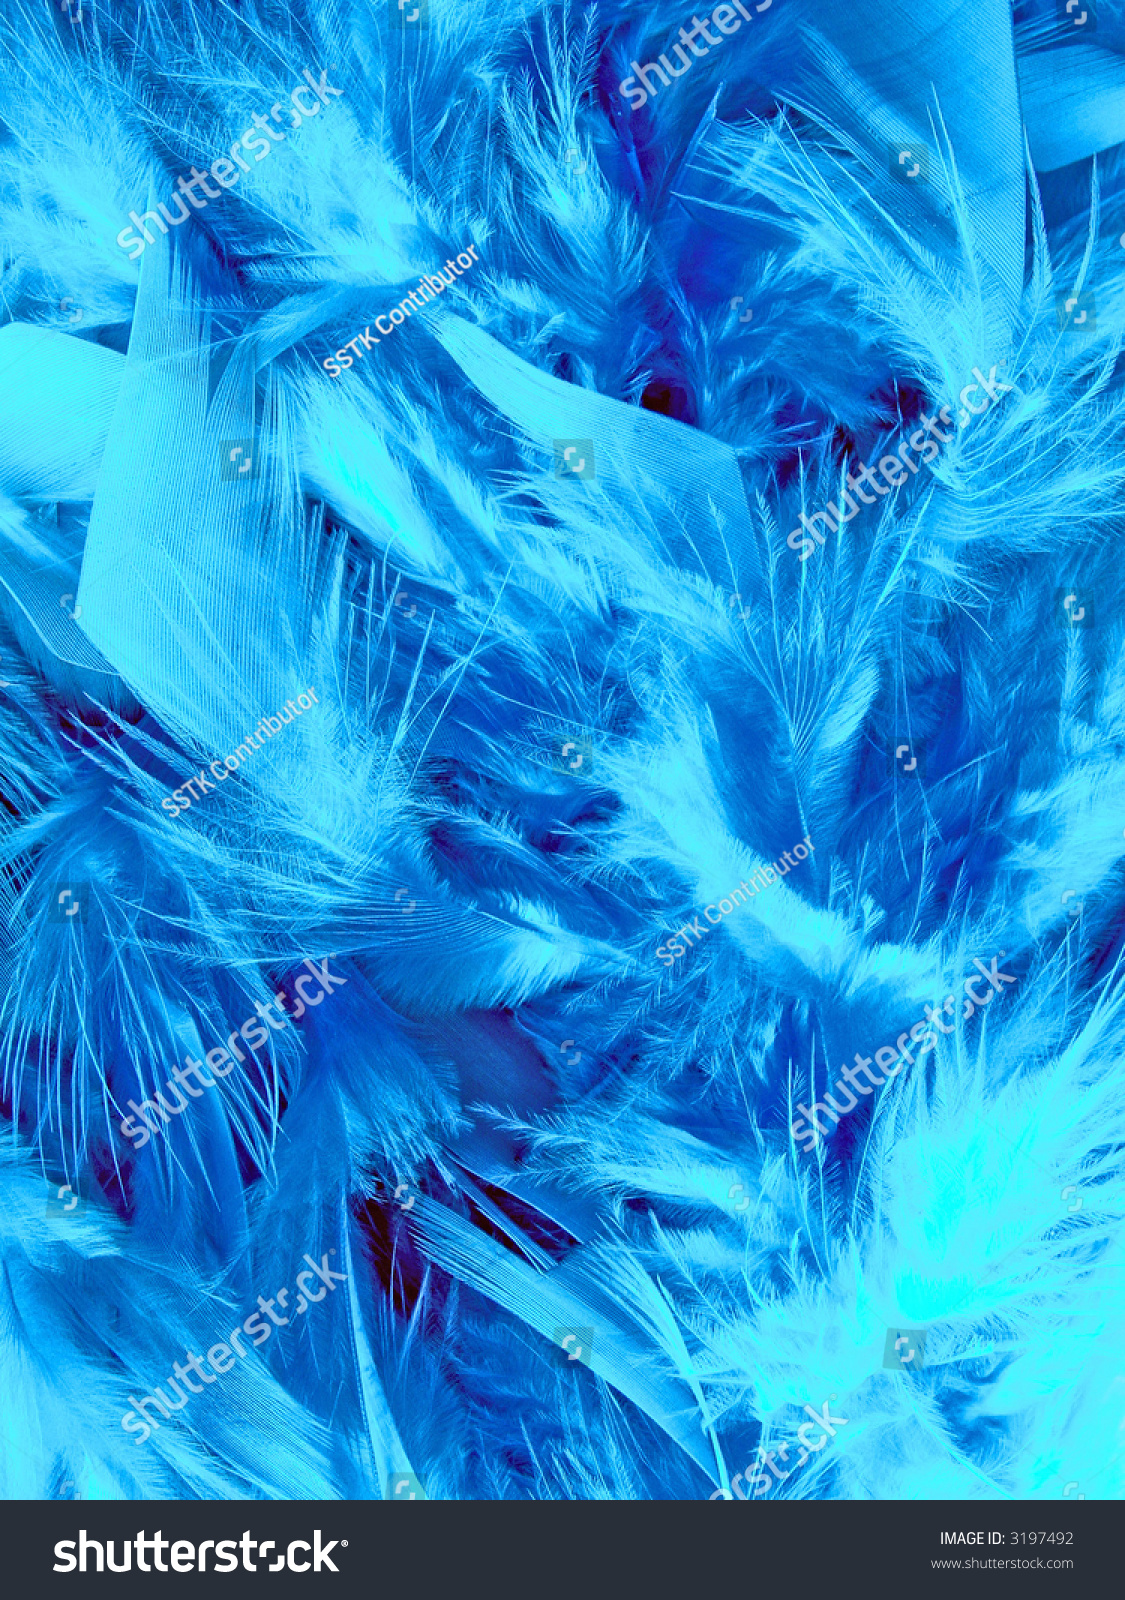 Abstract Blue Feather Texture Design Stock Photo 3197492 - Shutterstock